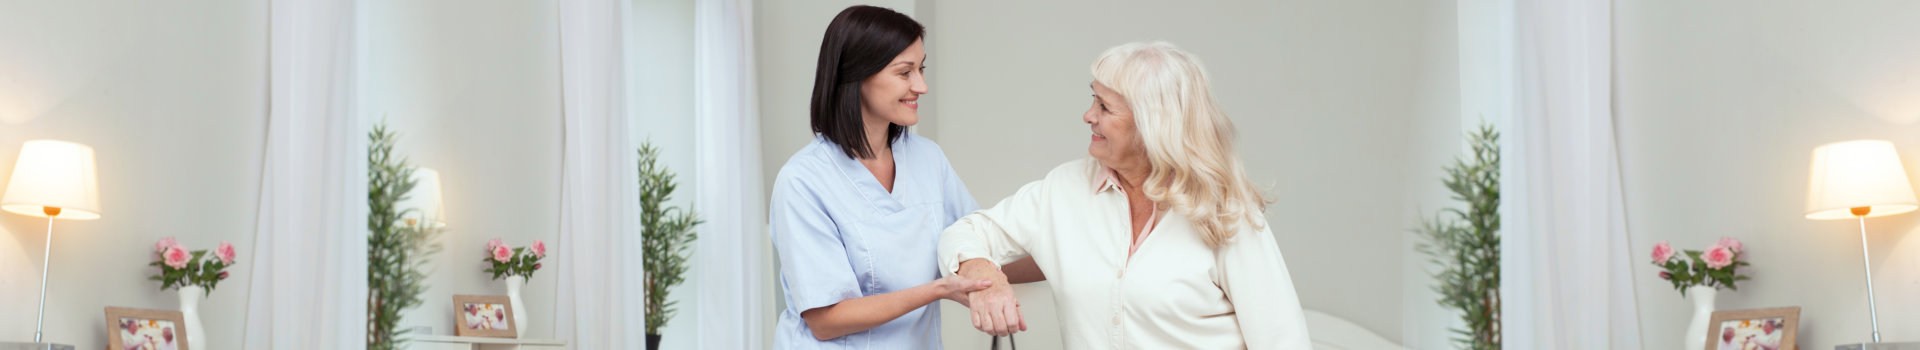 caregiver and patient looking each other